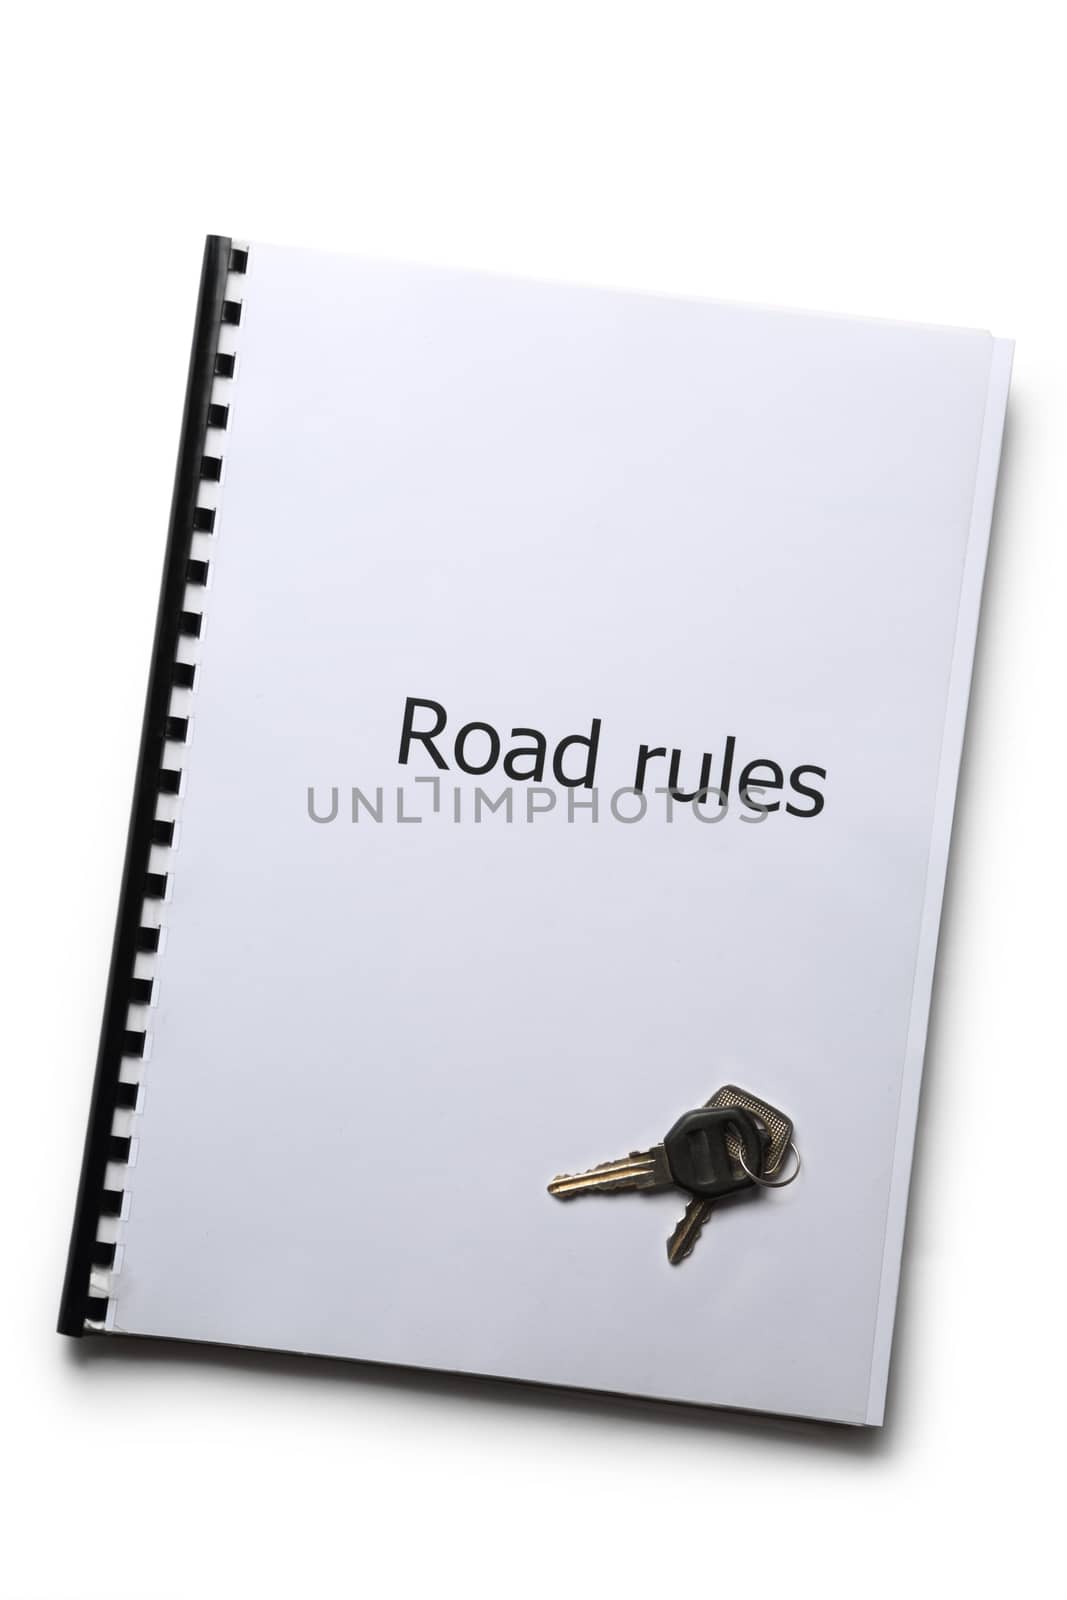 Road rules register with car keys